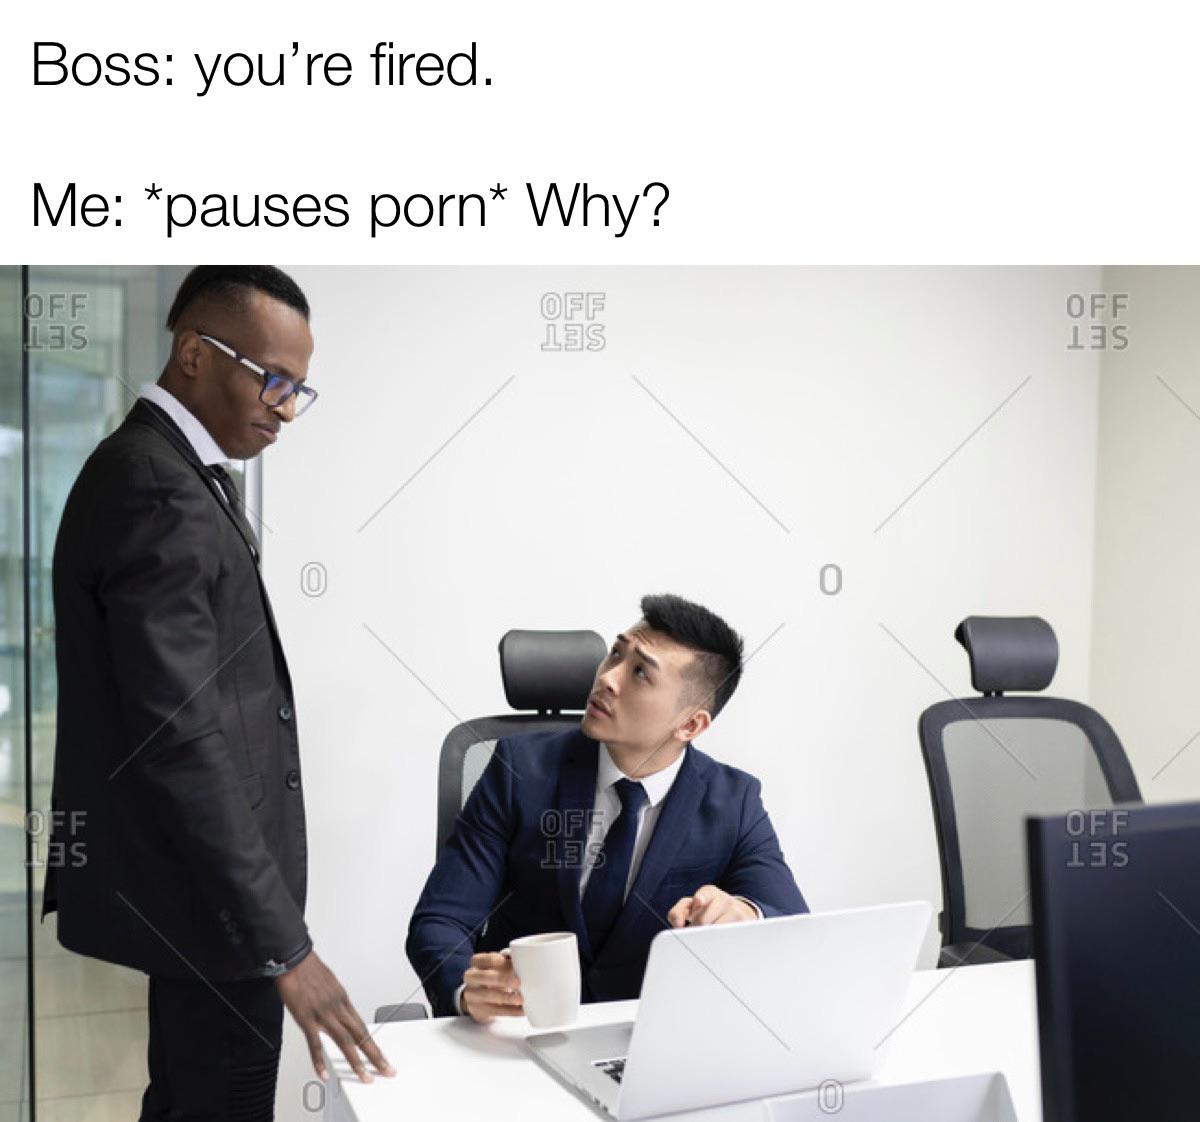 dank memes - presentation - Boss you're fired. Me pauses porn Why? Off Off 13S Les Off 135 Off Las Off Les Off 13S